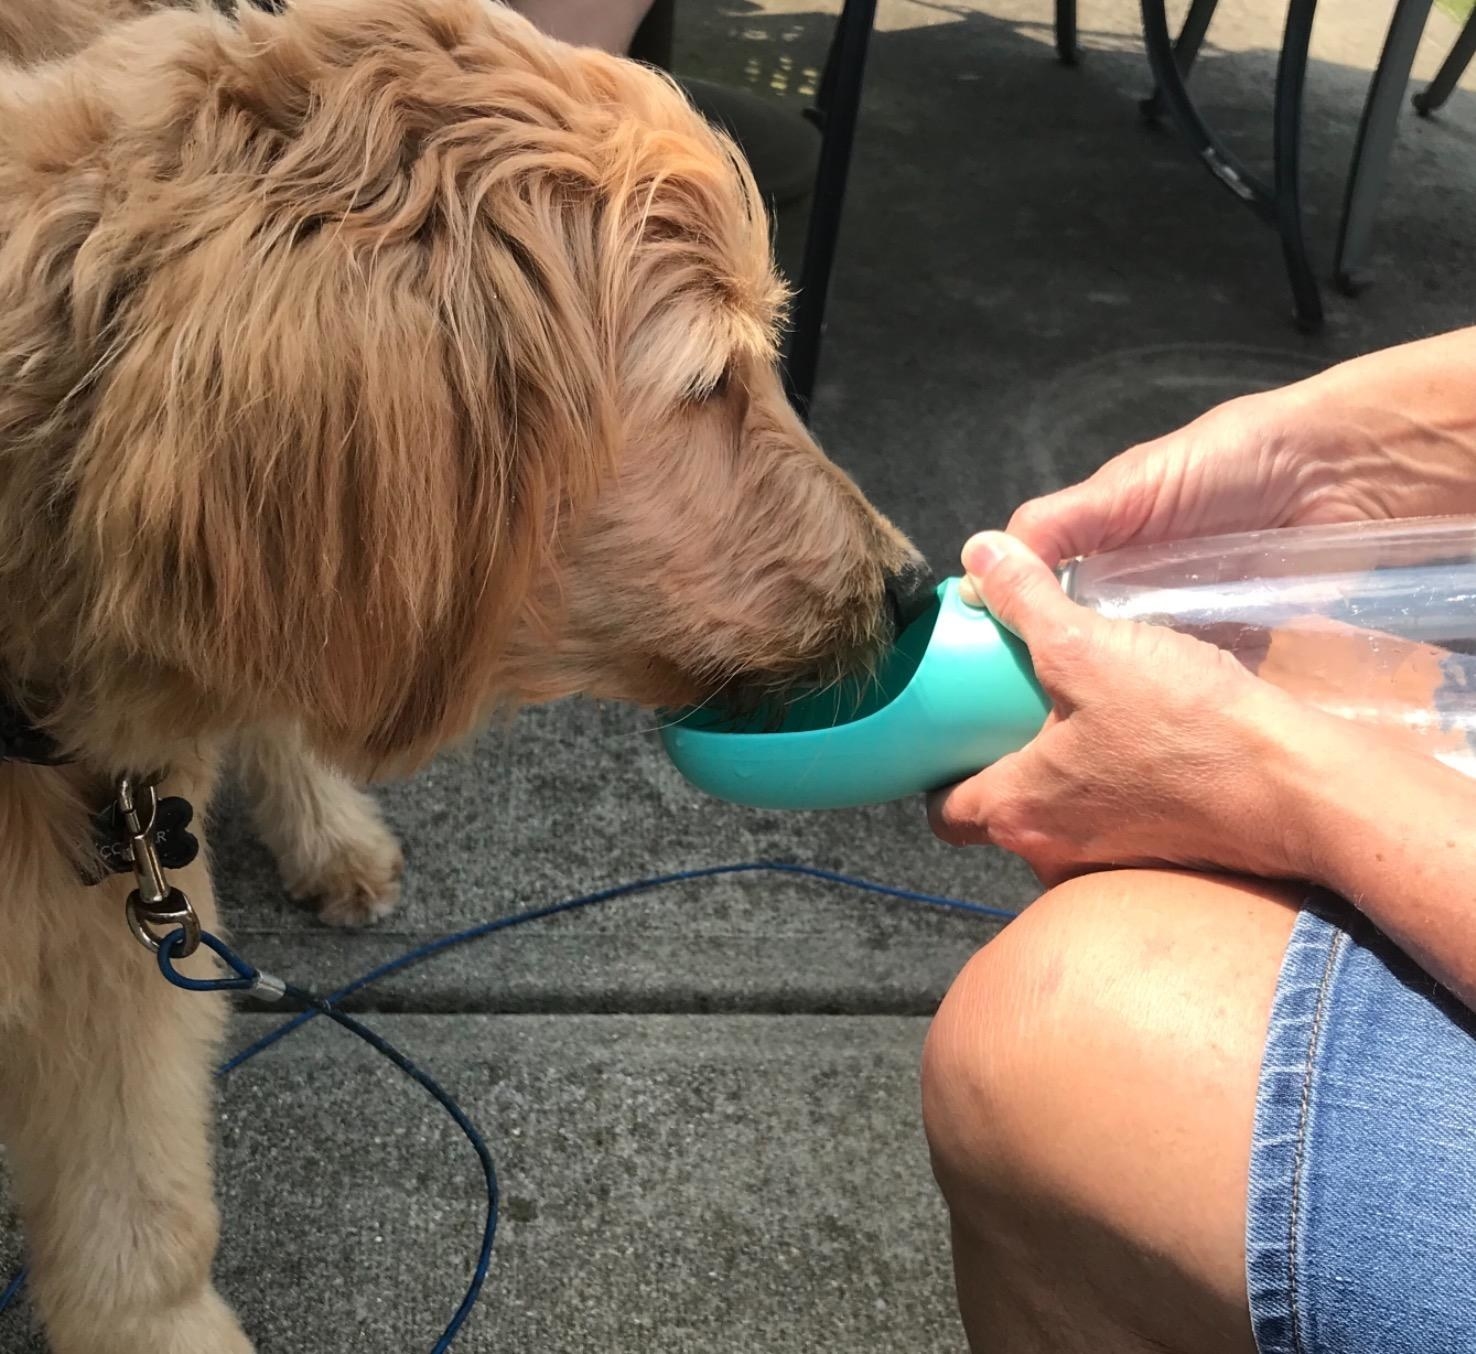 dog drinking out of the bottle, which has a clear cylindrical bottle to hold the water, and a scoop-shaped cup for the dog to drink out of